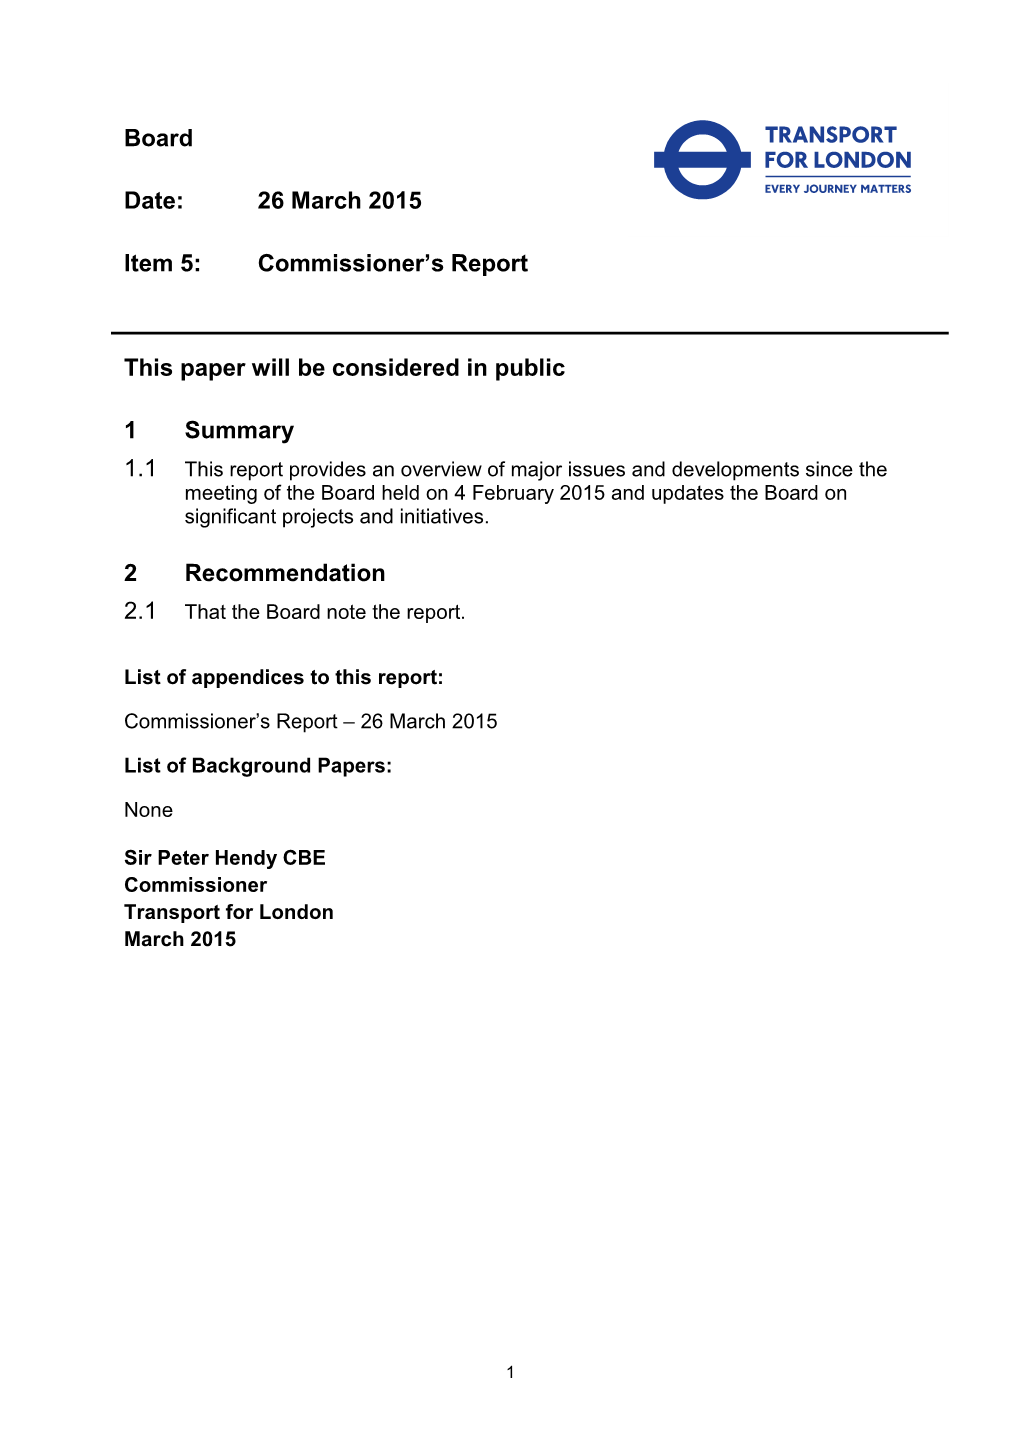 Board Date: 26 March 2015 Item 5: Commissioner's Report This Paper Will Be Considered in Public 1 Summary 2 Recommendation